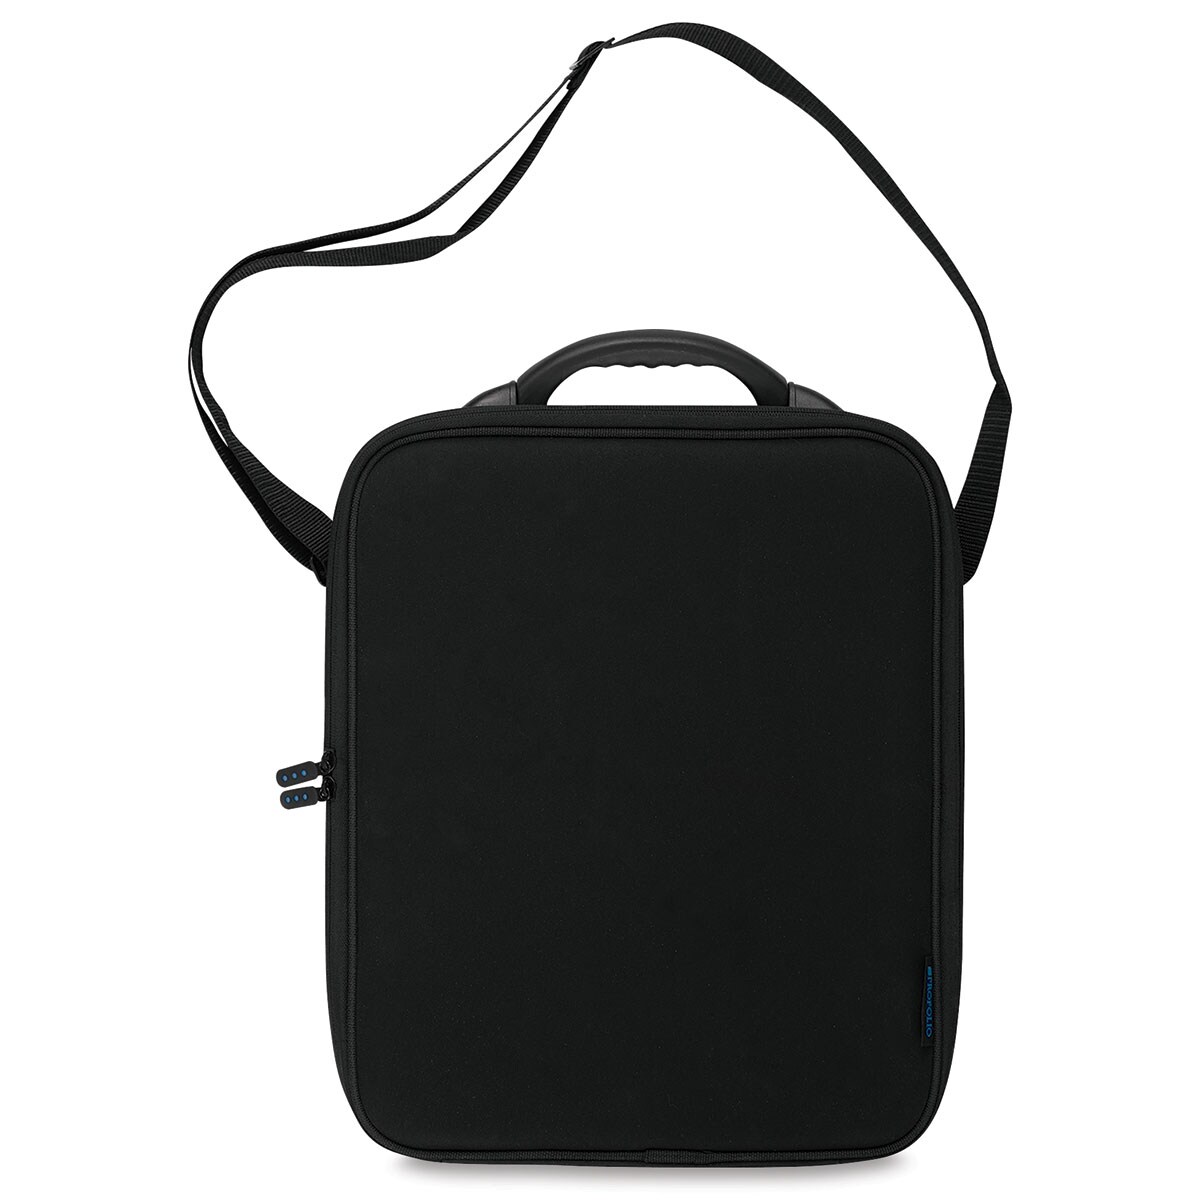 Itoya Profolio Marker and Pad Carrying Case - 14 x 17